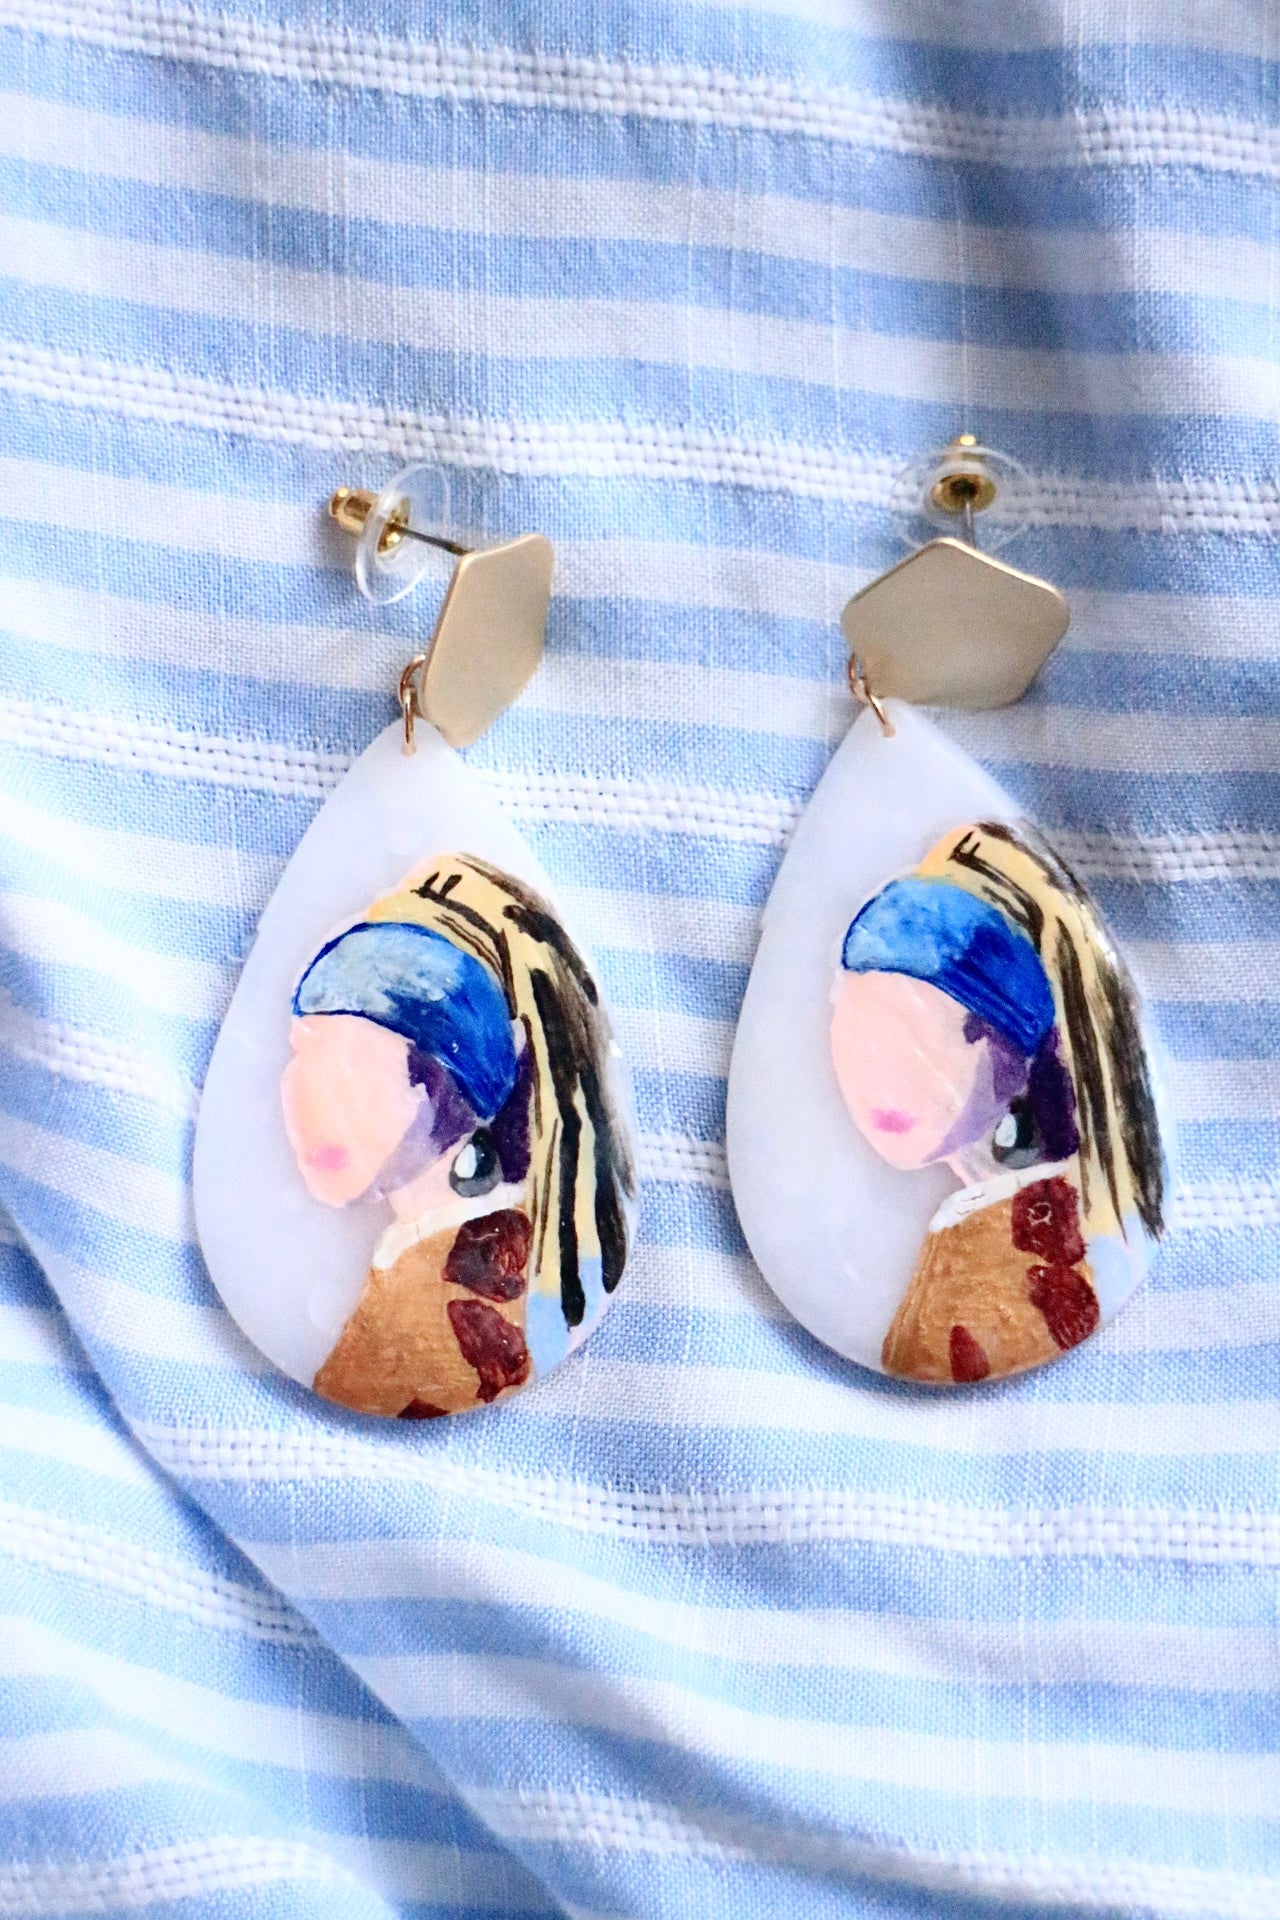 Polymer clay earrings - Handmade/Painted Inspired by The Girl with a Pearl Earring